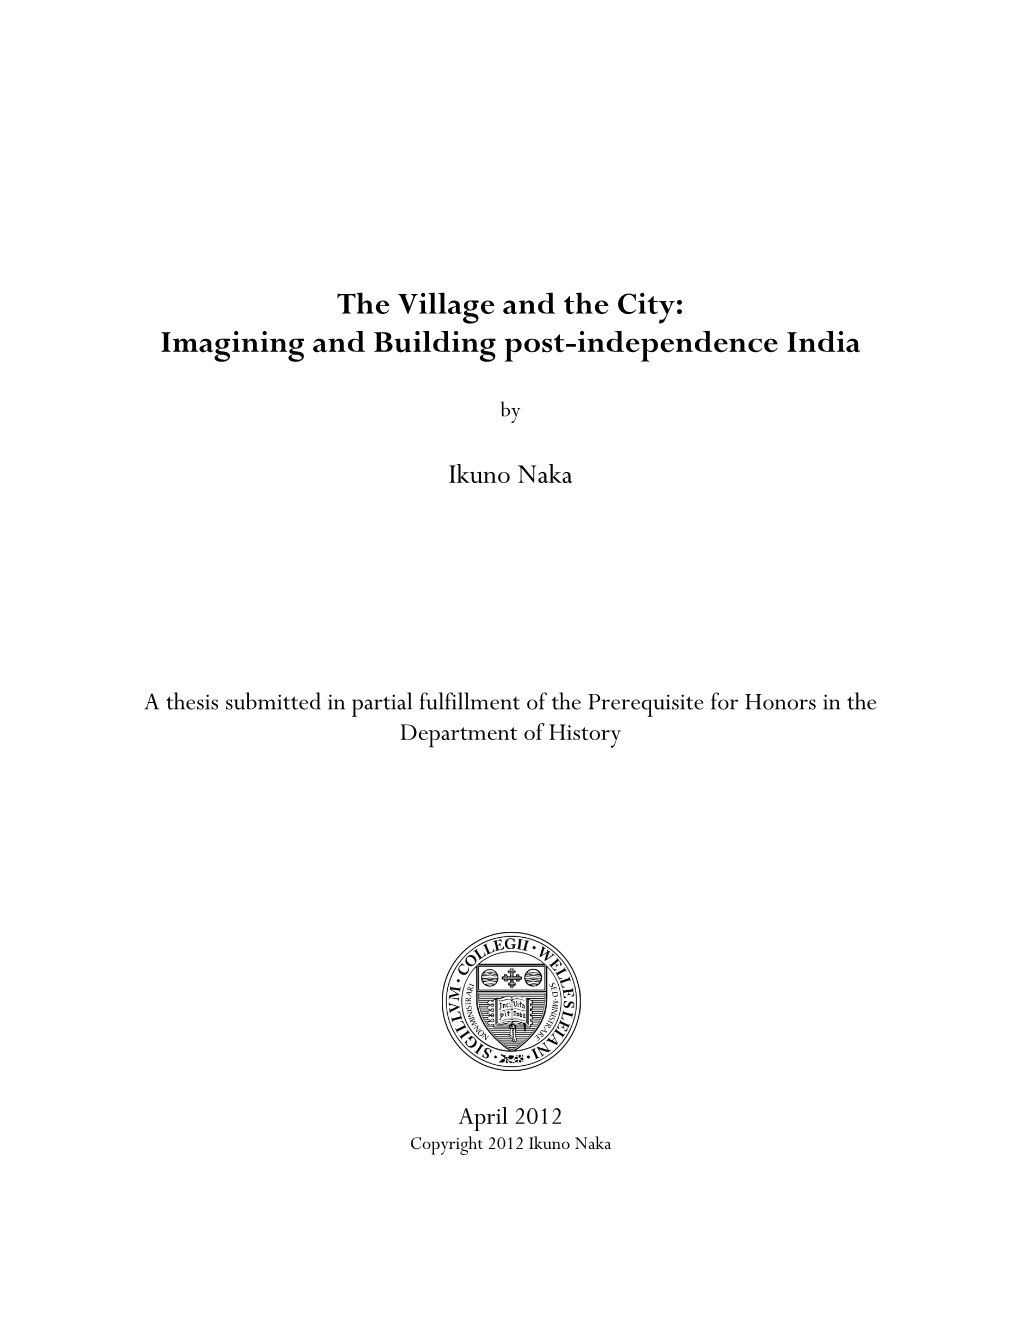 The Village and the City: Imagining and Building Post-Independence India